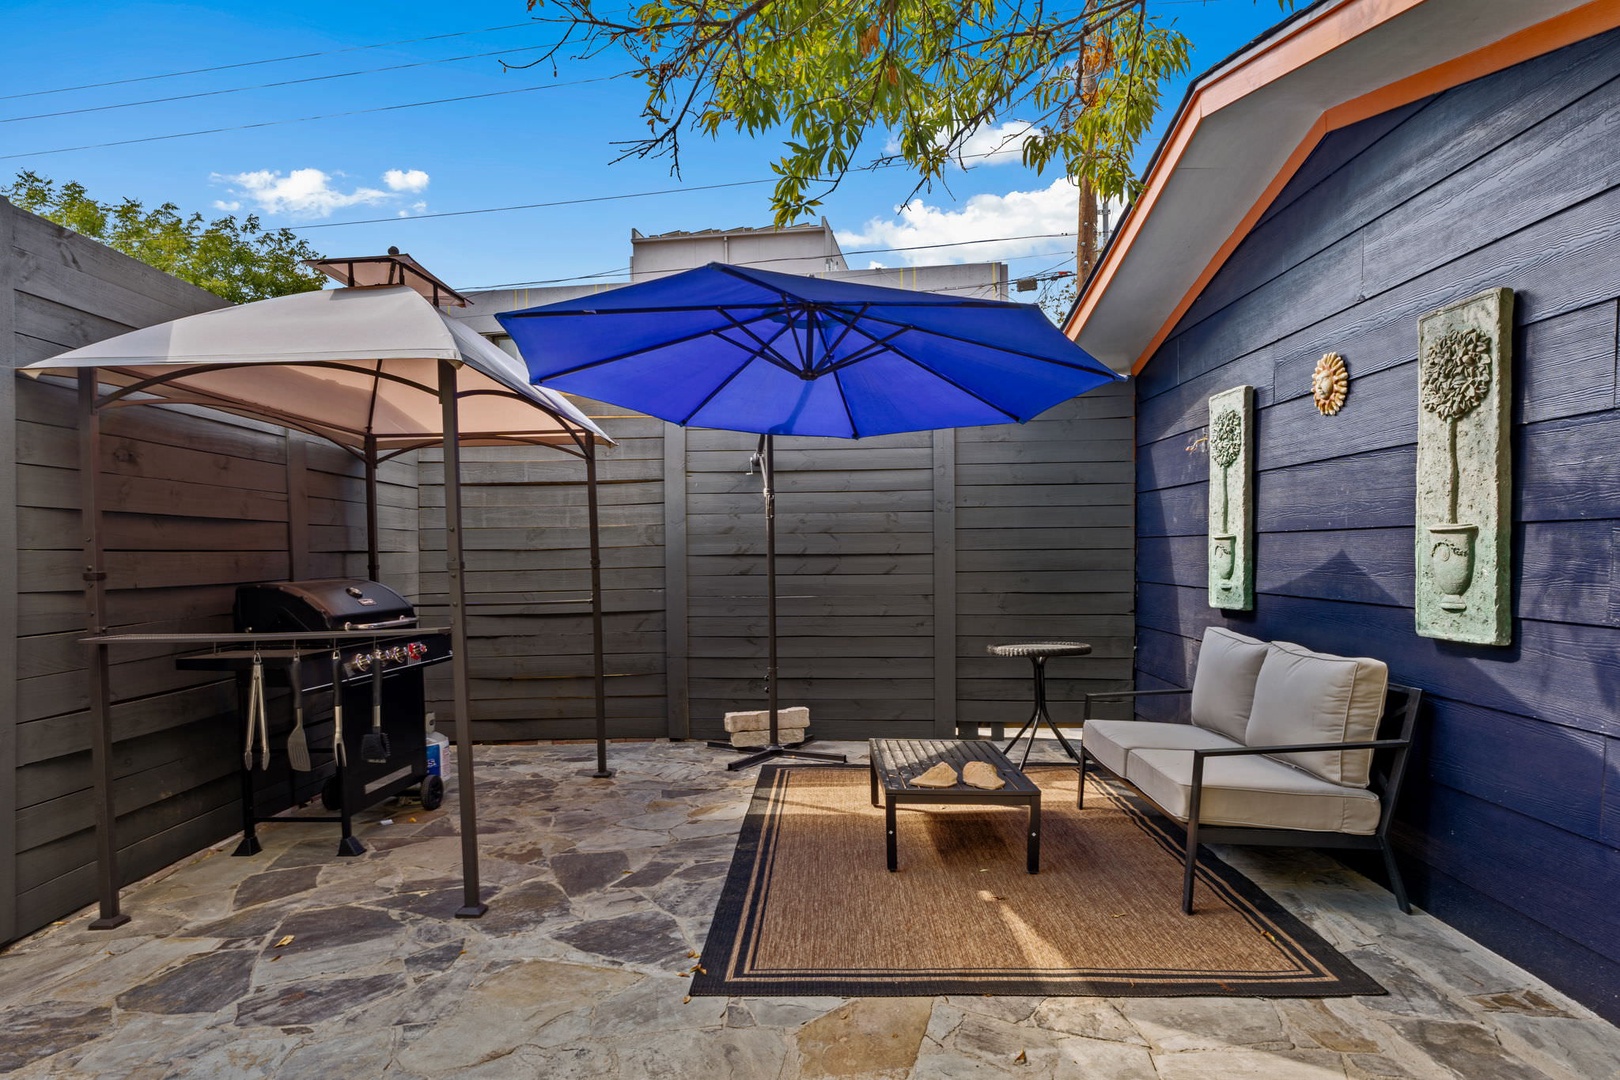 Patio with hot tub, BBQ, and seating area (Unit B)